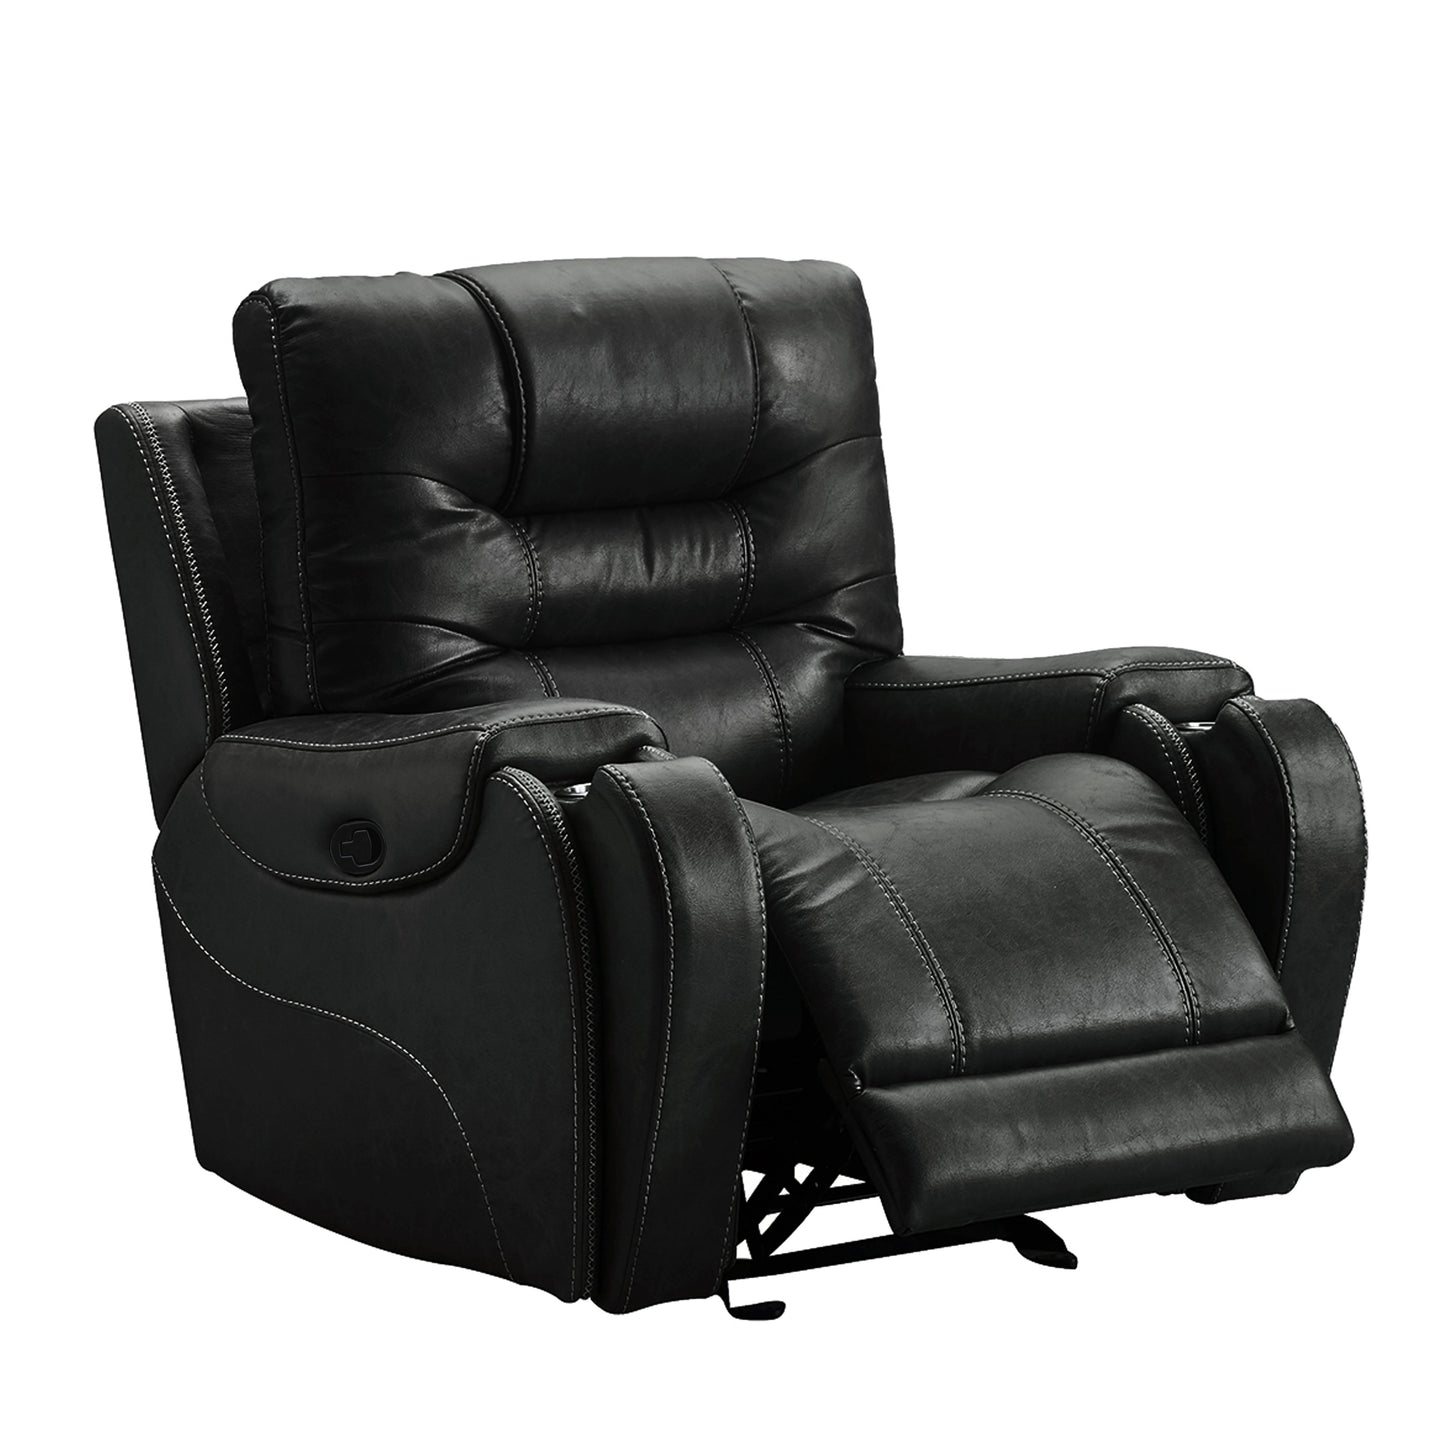 Rowena Contemporary Faux Leather Recliner with Cup Holder, Smoke